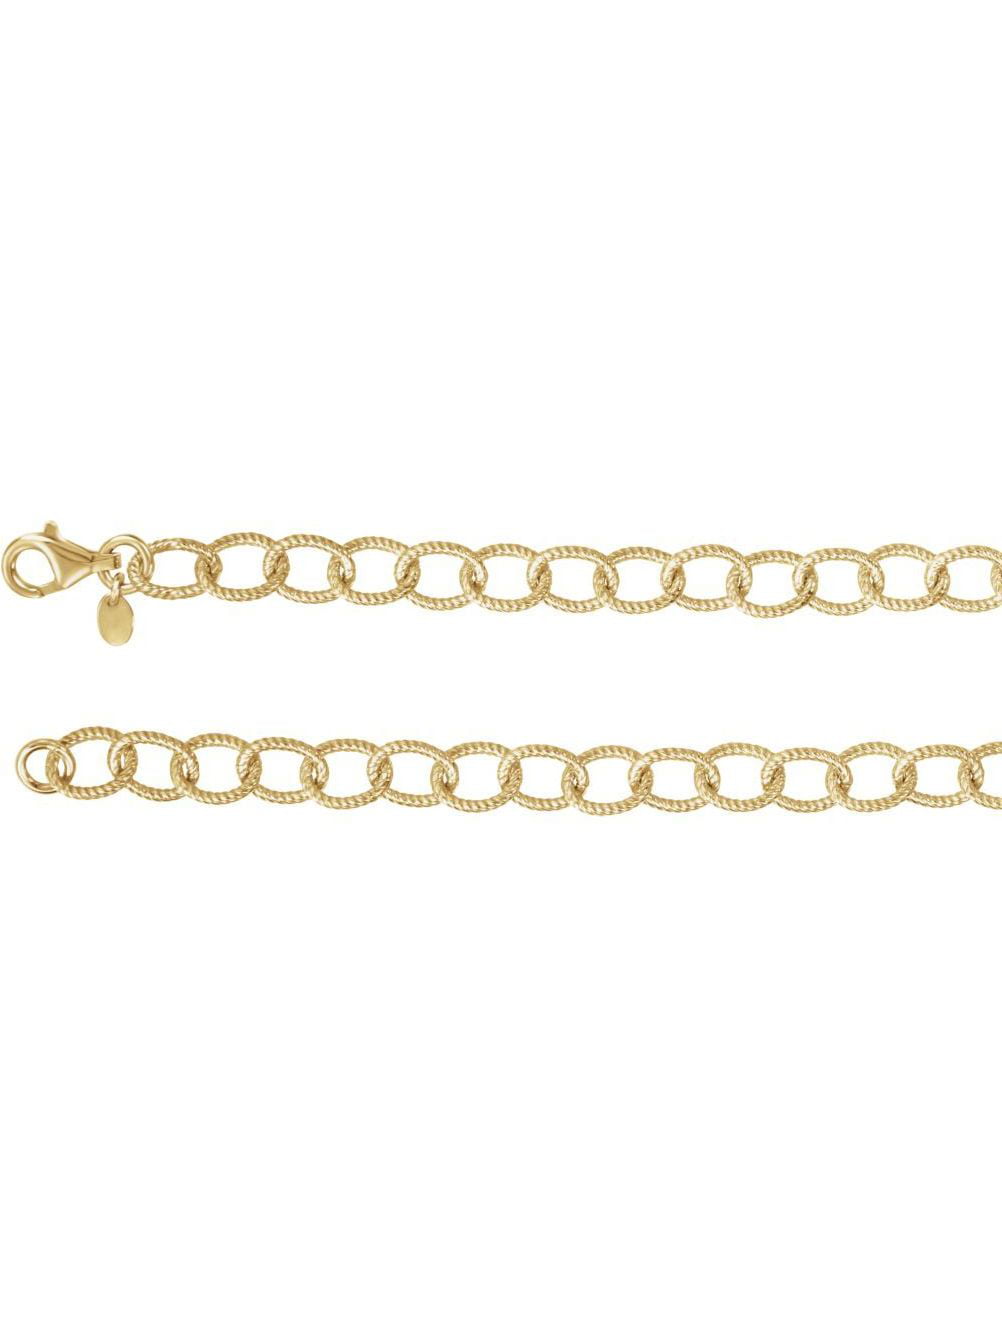 24K Yellow Vermeil 6mm Knurled Cable 18 Chain